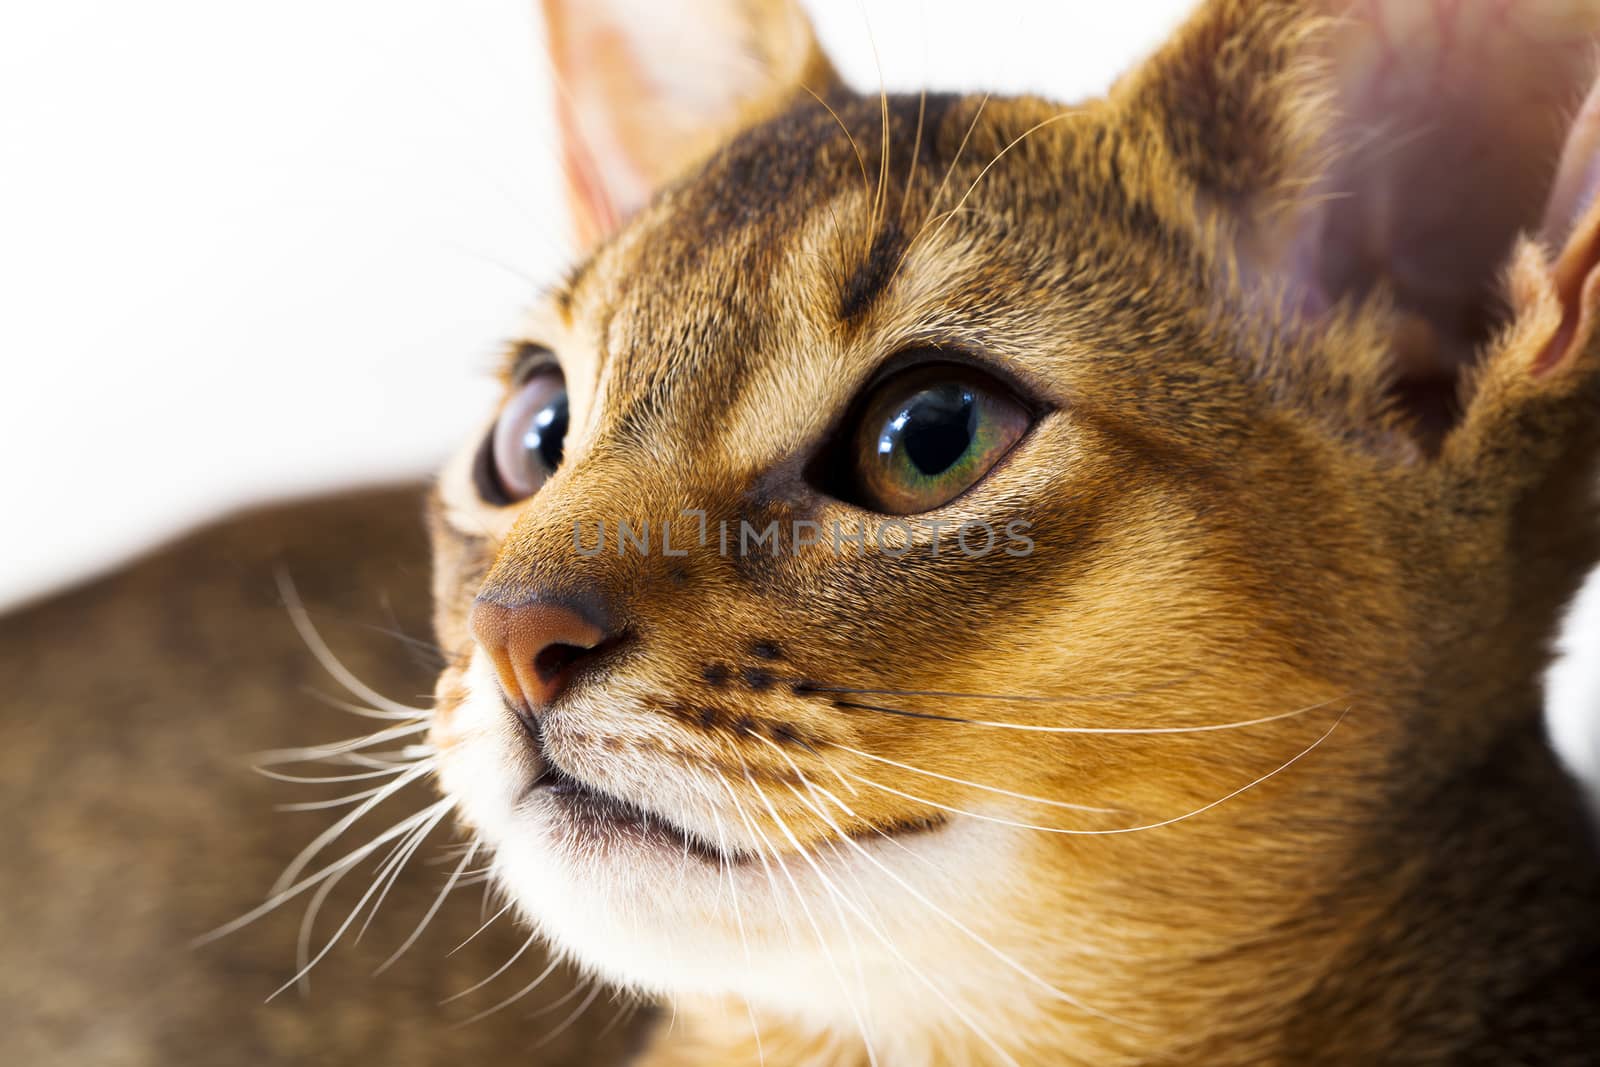   photographed by a close up the head of a small Abyssinian kitten